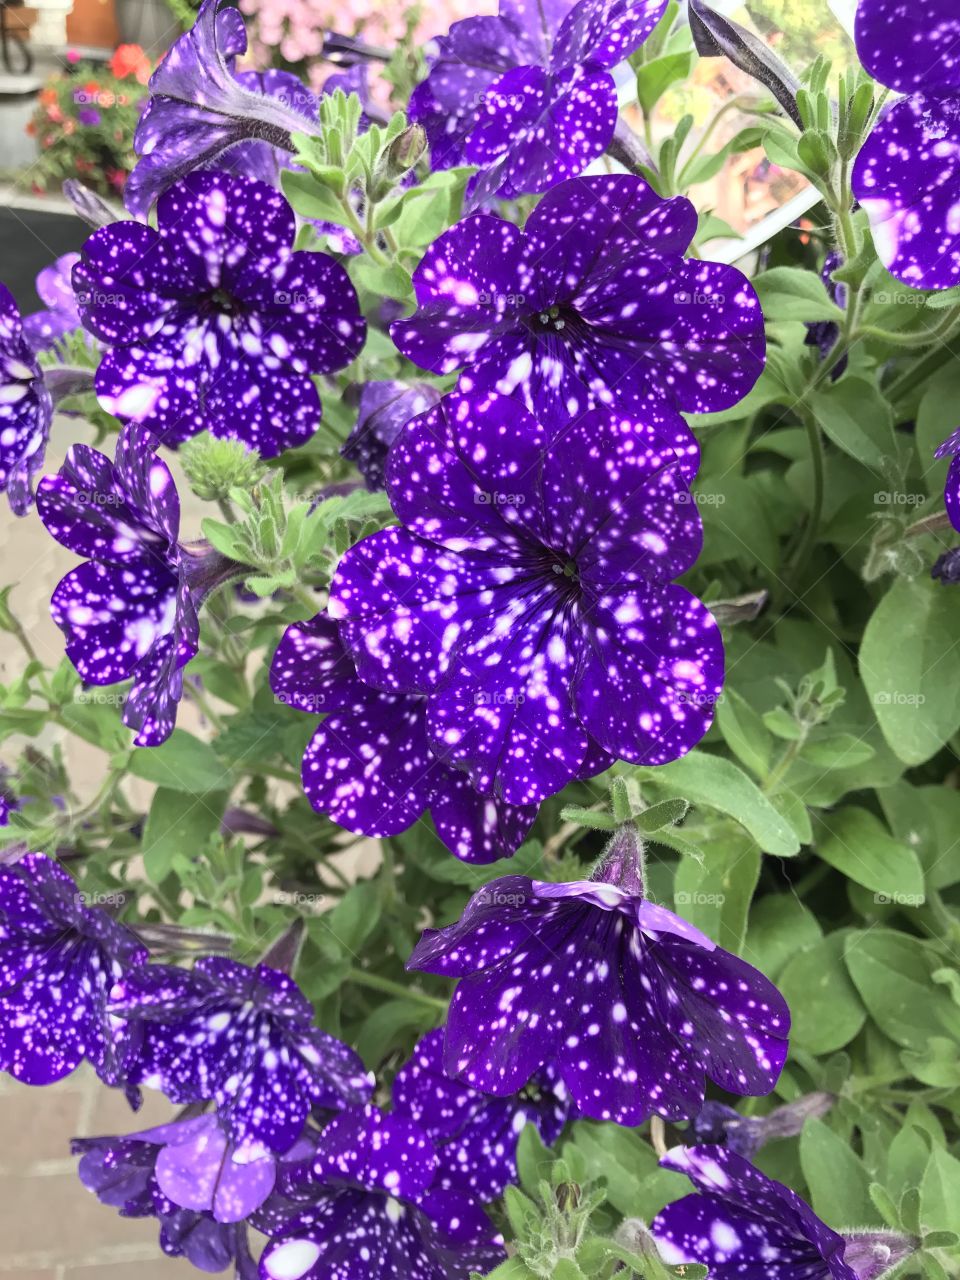 Some cute purple & white speckled petunias at the local nursery